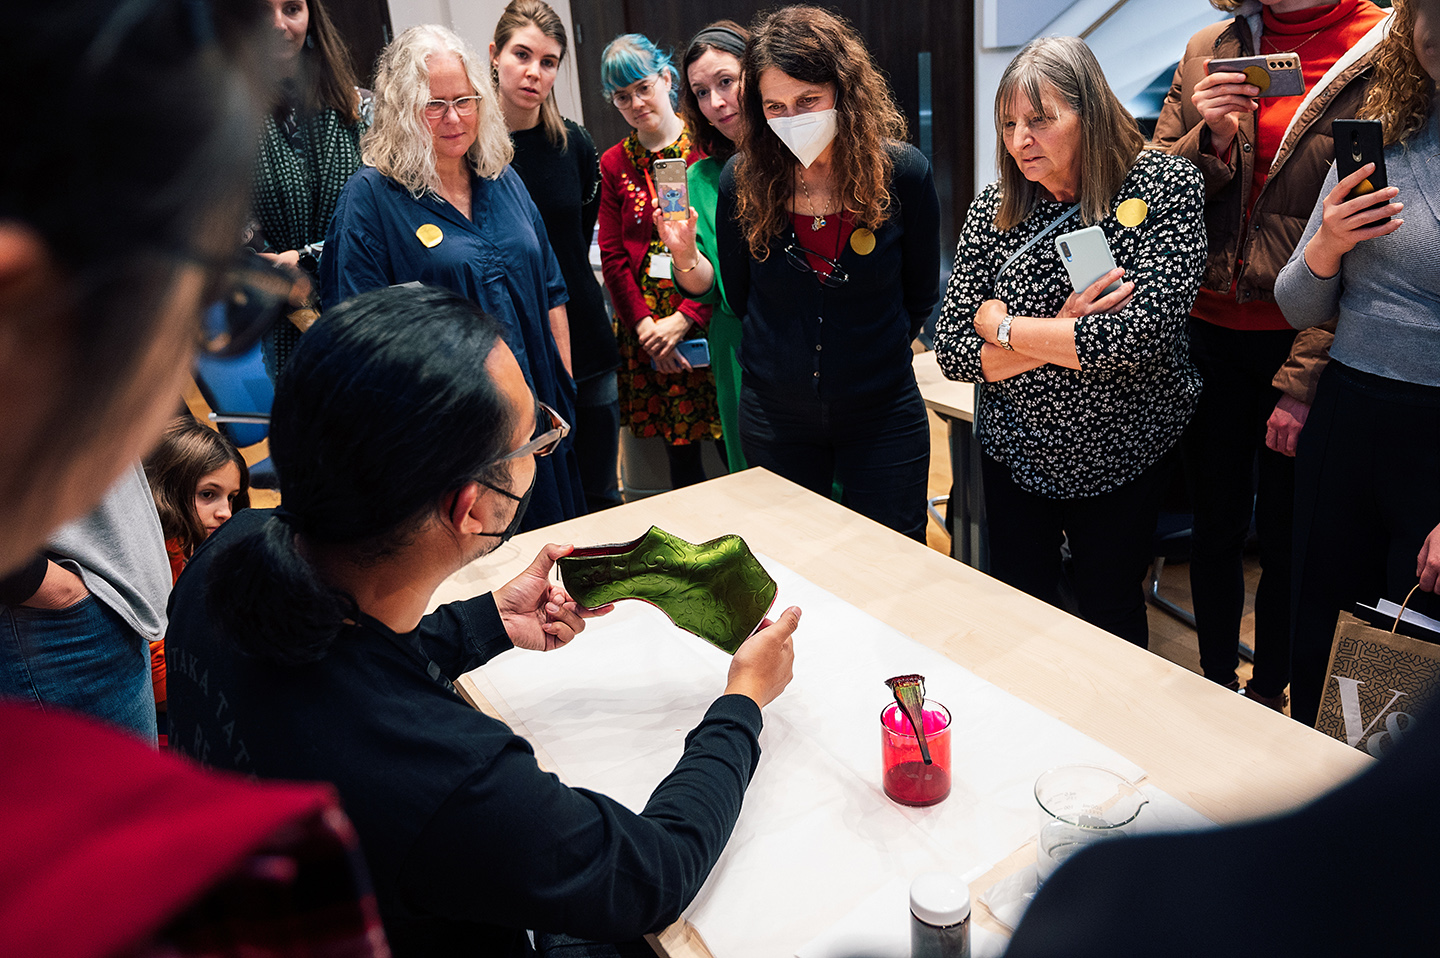 [Vol. 3] Masterclass: Tokyo Crafts, a Collaborative Art Event Held by Tokyo’s Edo Tokyo Kirari Project and Britain’s Victoria and Albert Museum